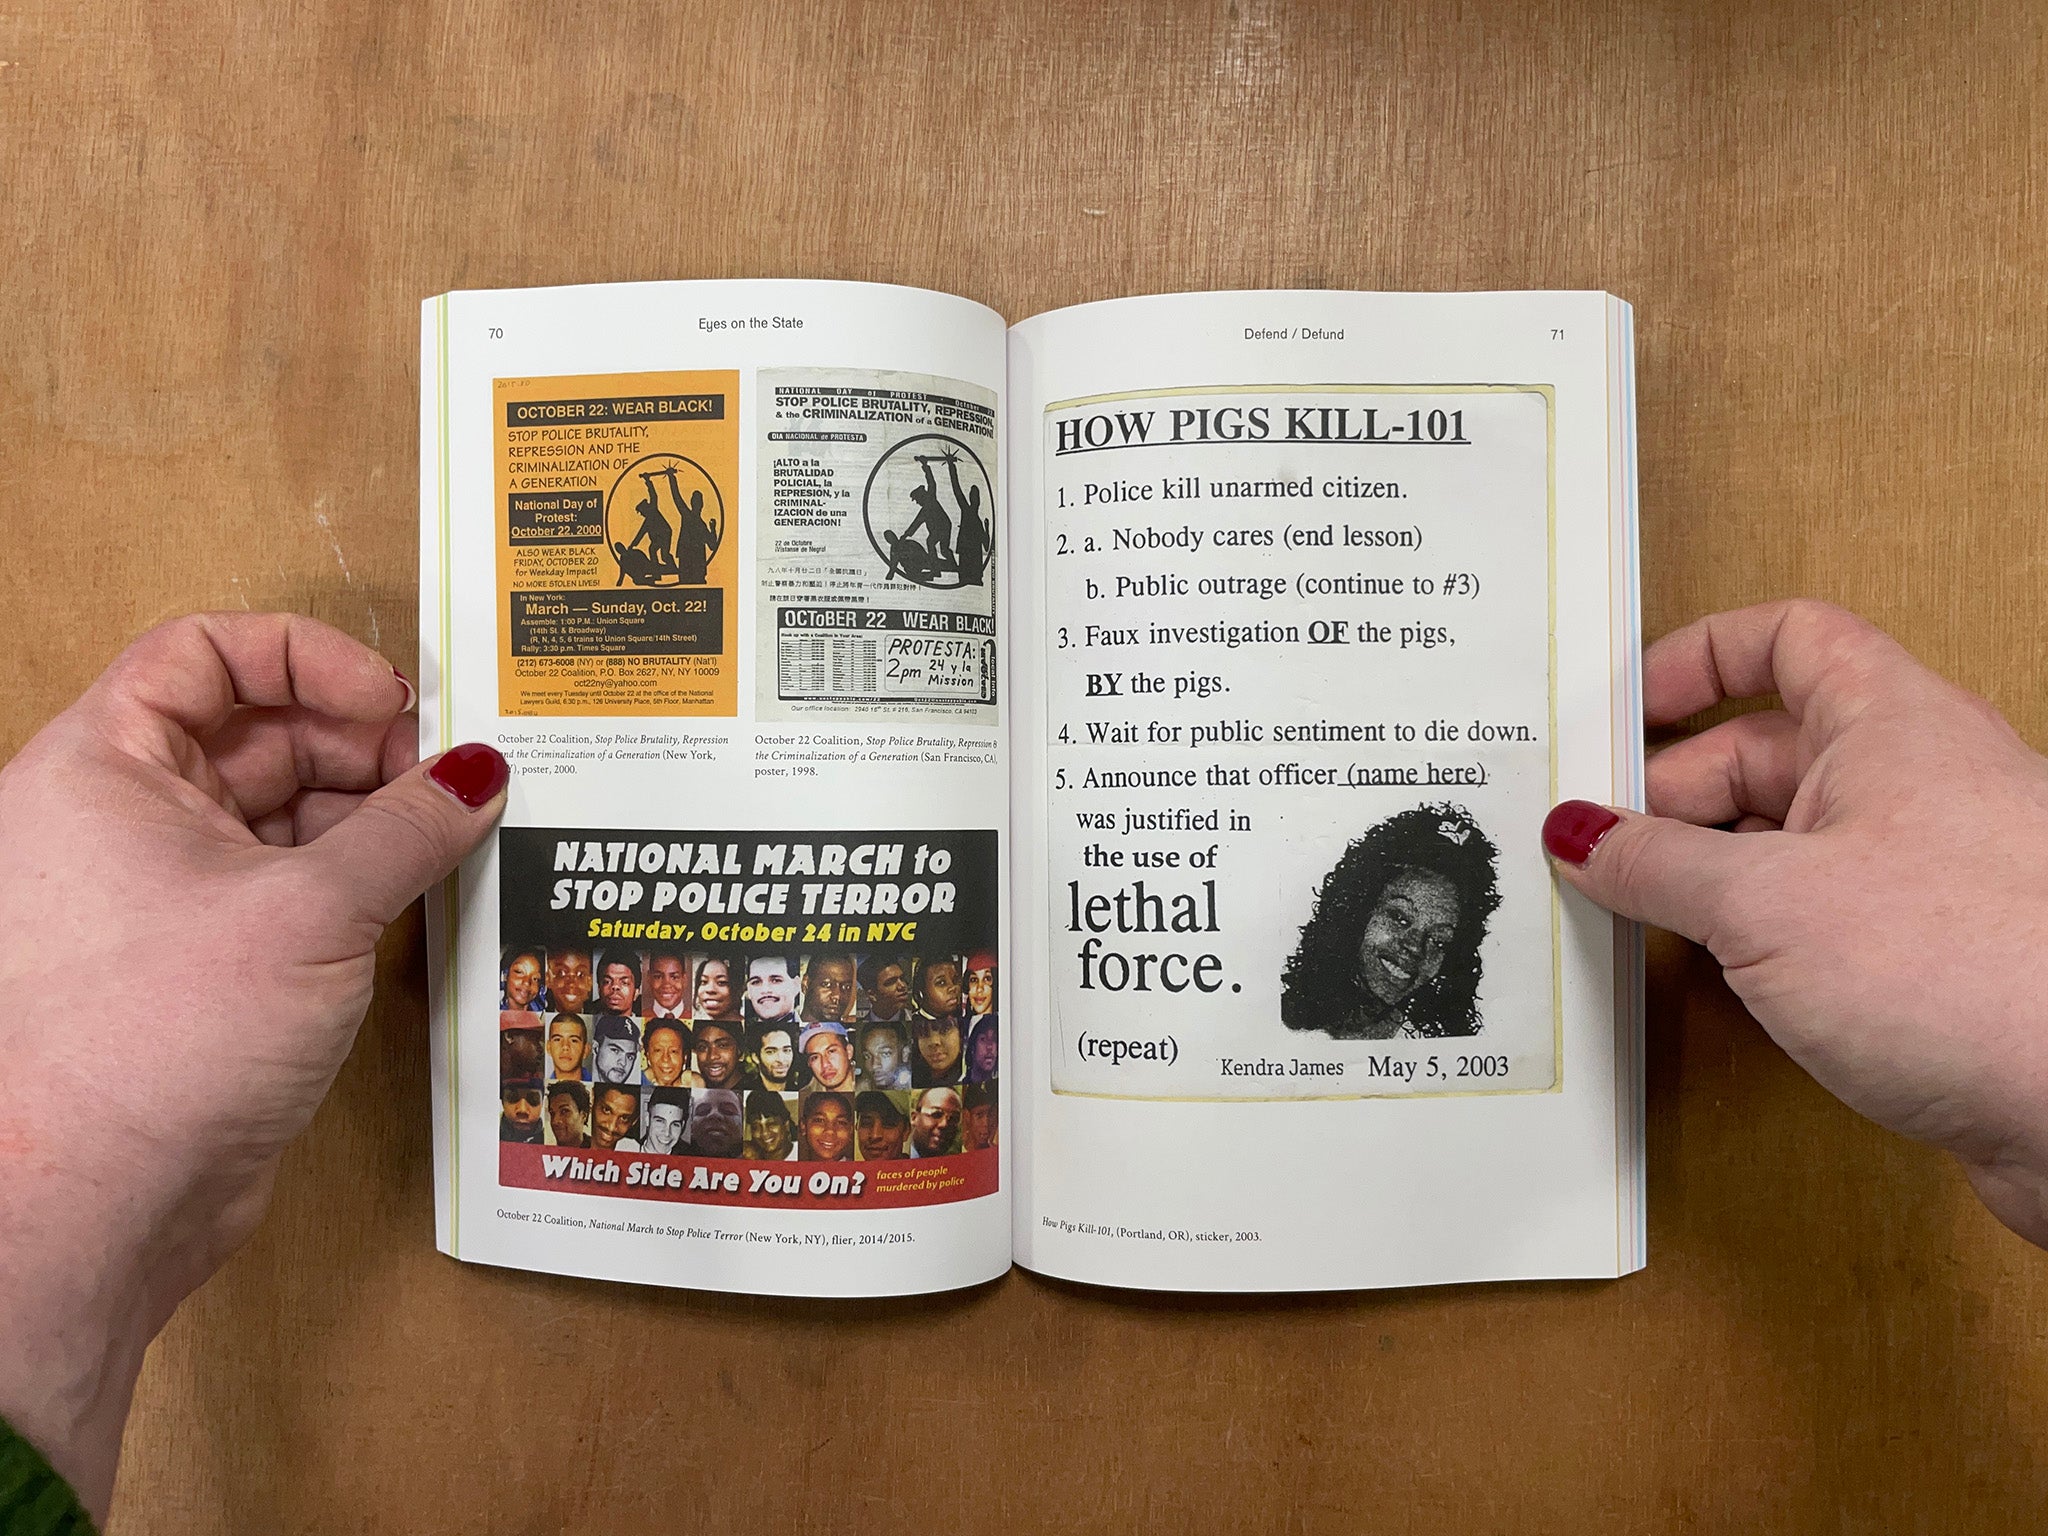 DEFEND / DEFUND: A VISUAL HISTORY OF ORGANIZING AGAINST THE POLICE